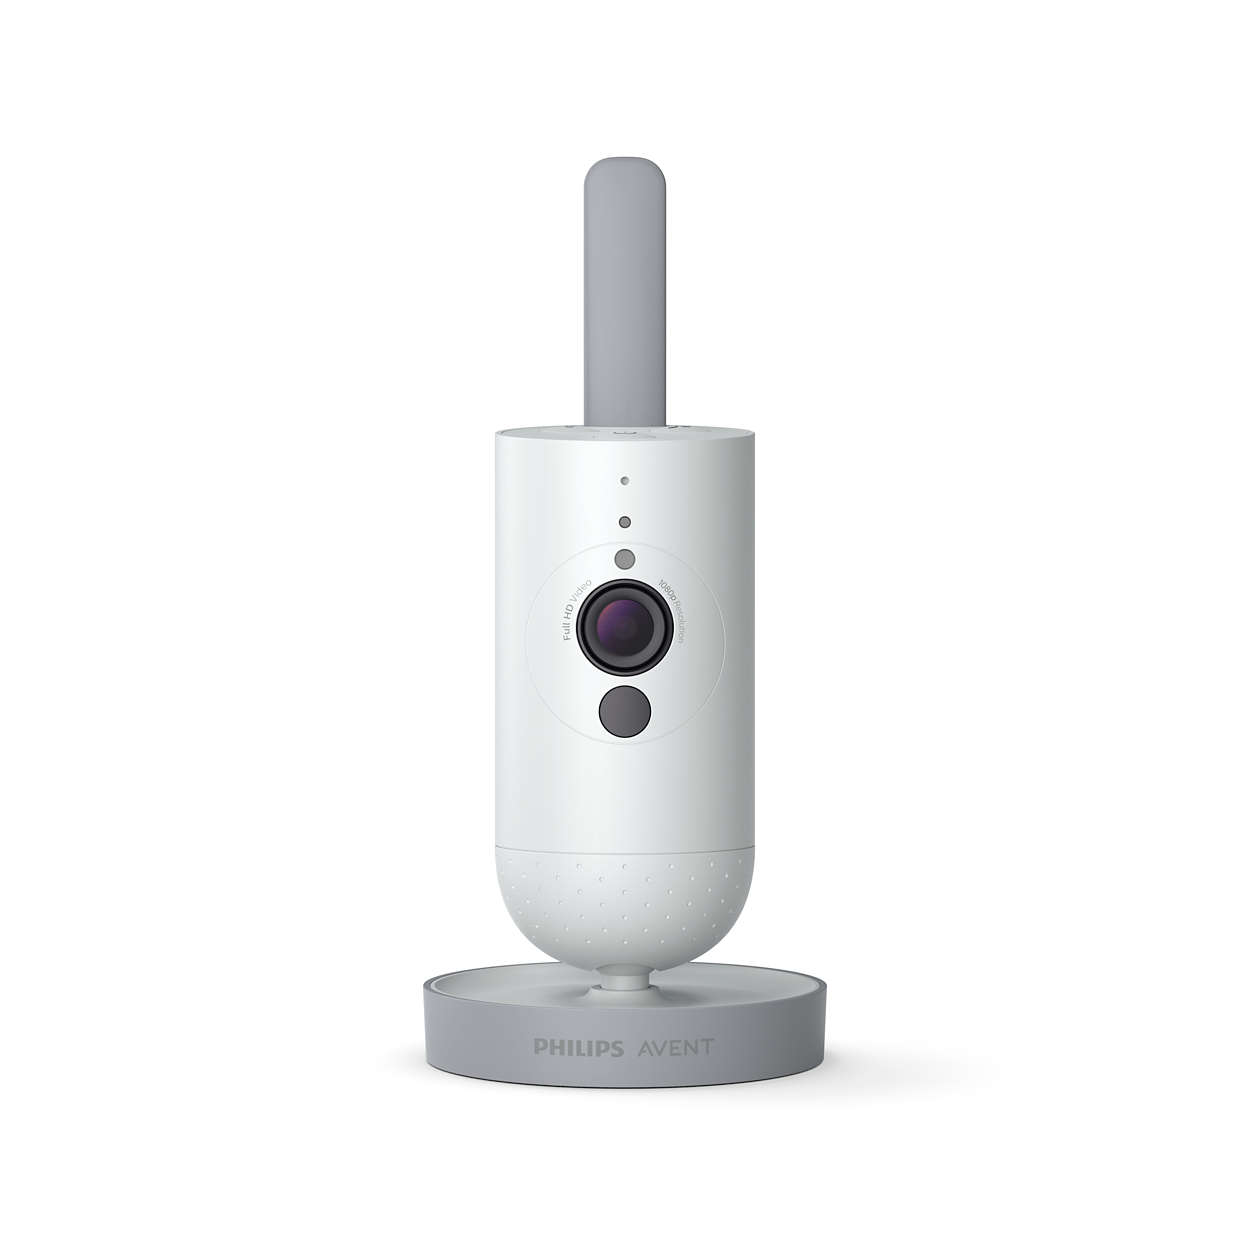 mit Baby Monitor Babyphone mit Full HD-Kamera und Secure Connect-System Philips Avent Connected Videophone SCD923/26 weiß App 